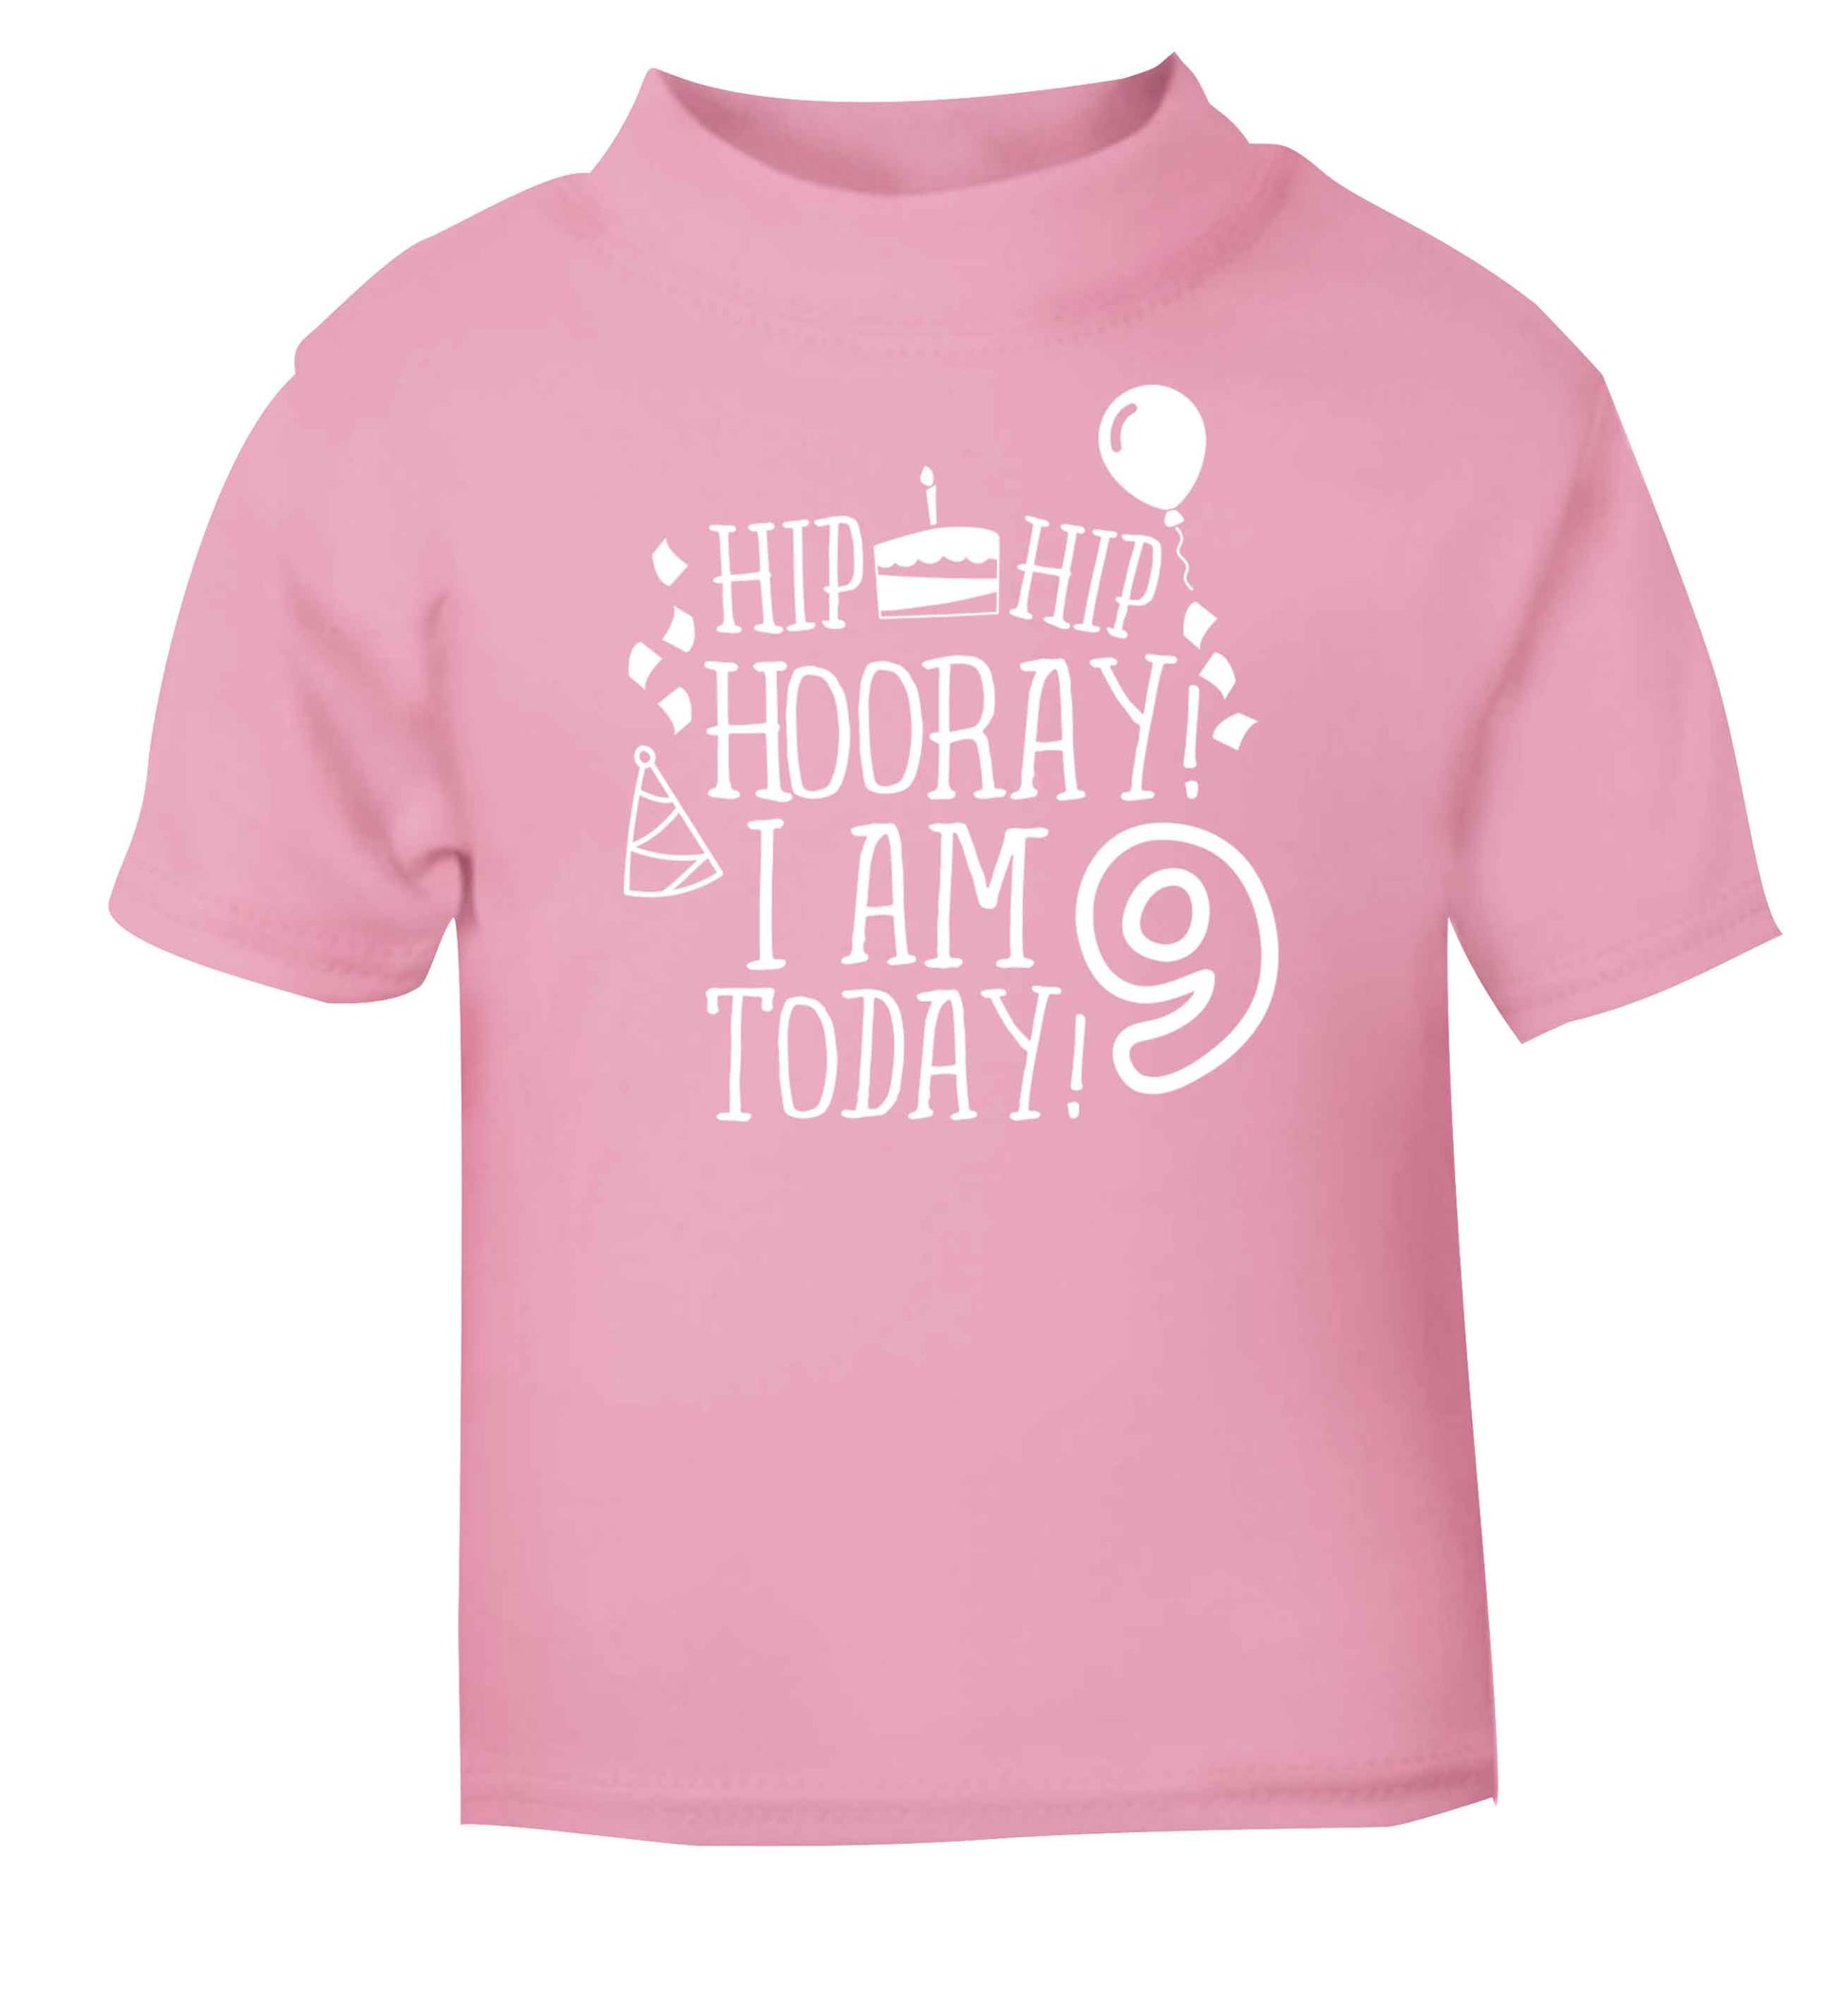 Hip hip hooray I am 9 today! light pink baby toddler Tshirt 2 Years